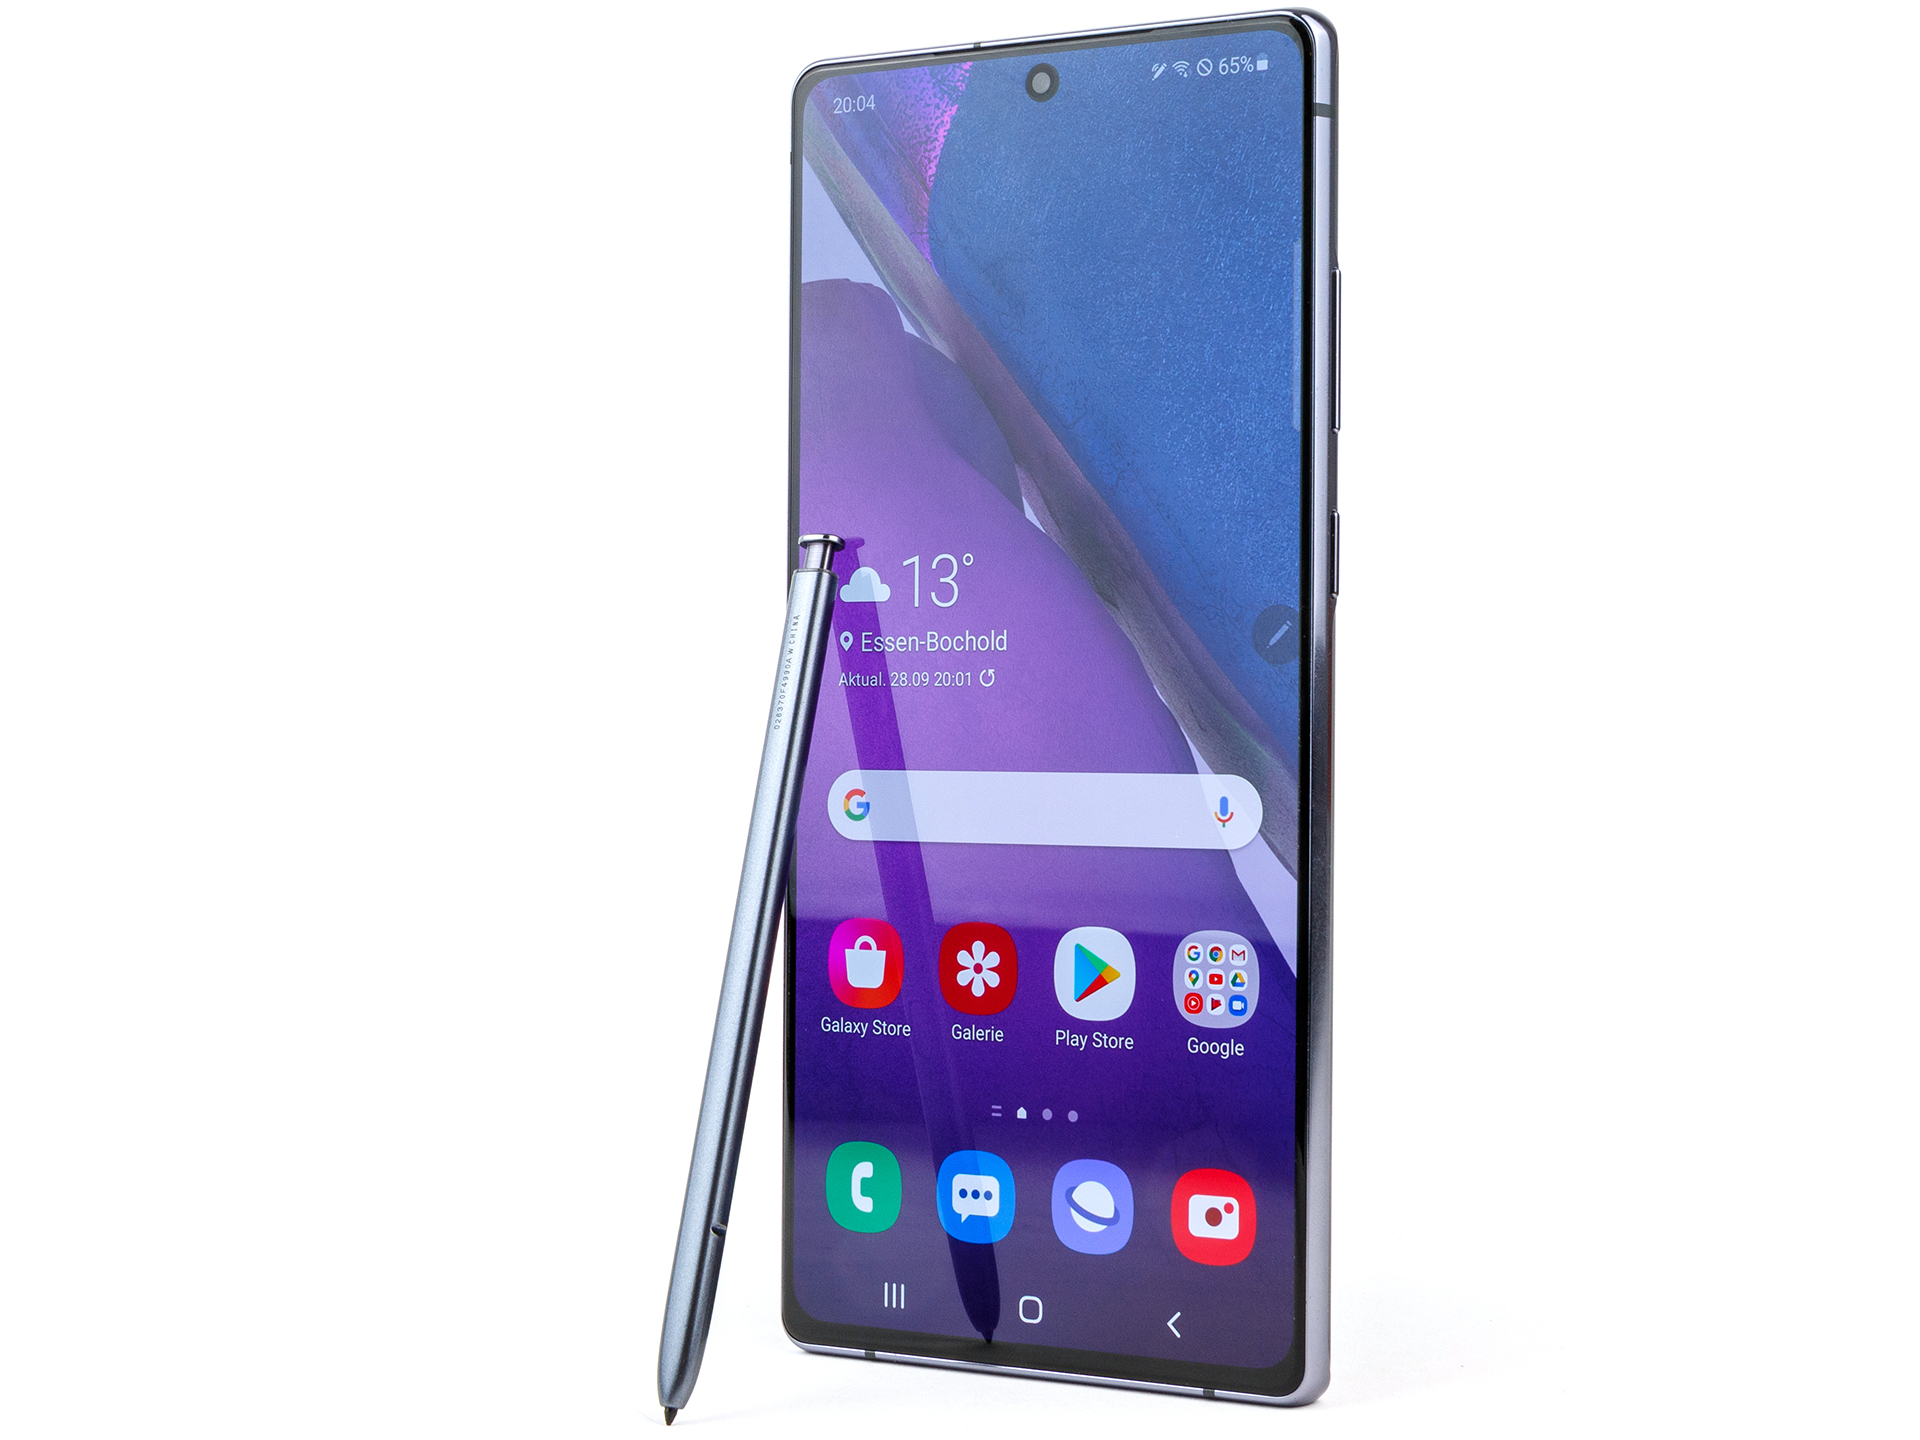 Samsung Galaxy Note 10 Lite Review - Pros and cons, Verdict